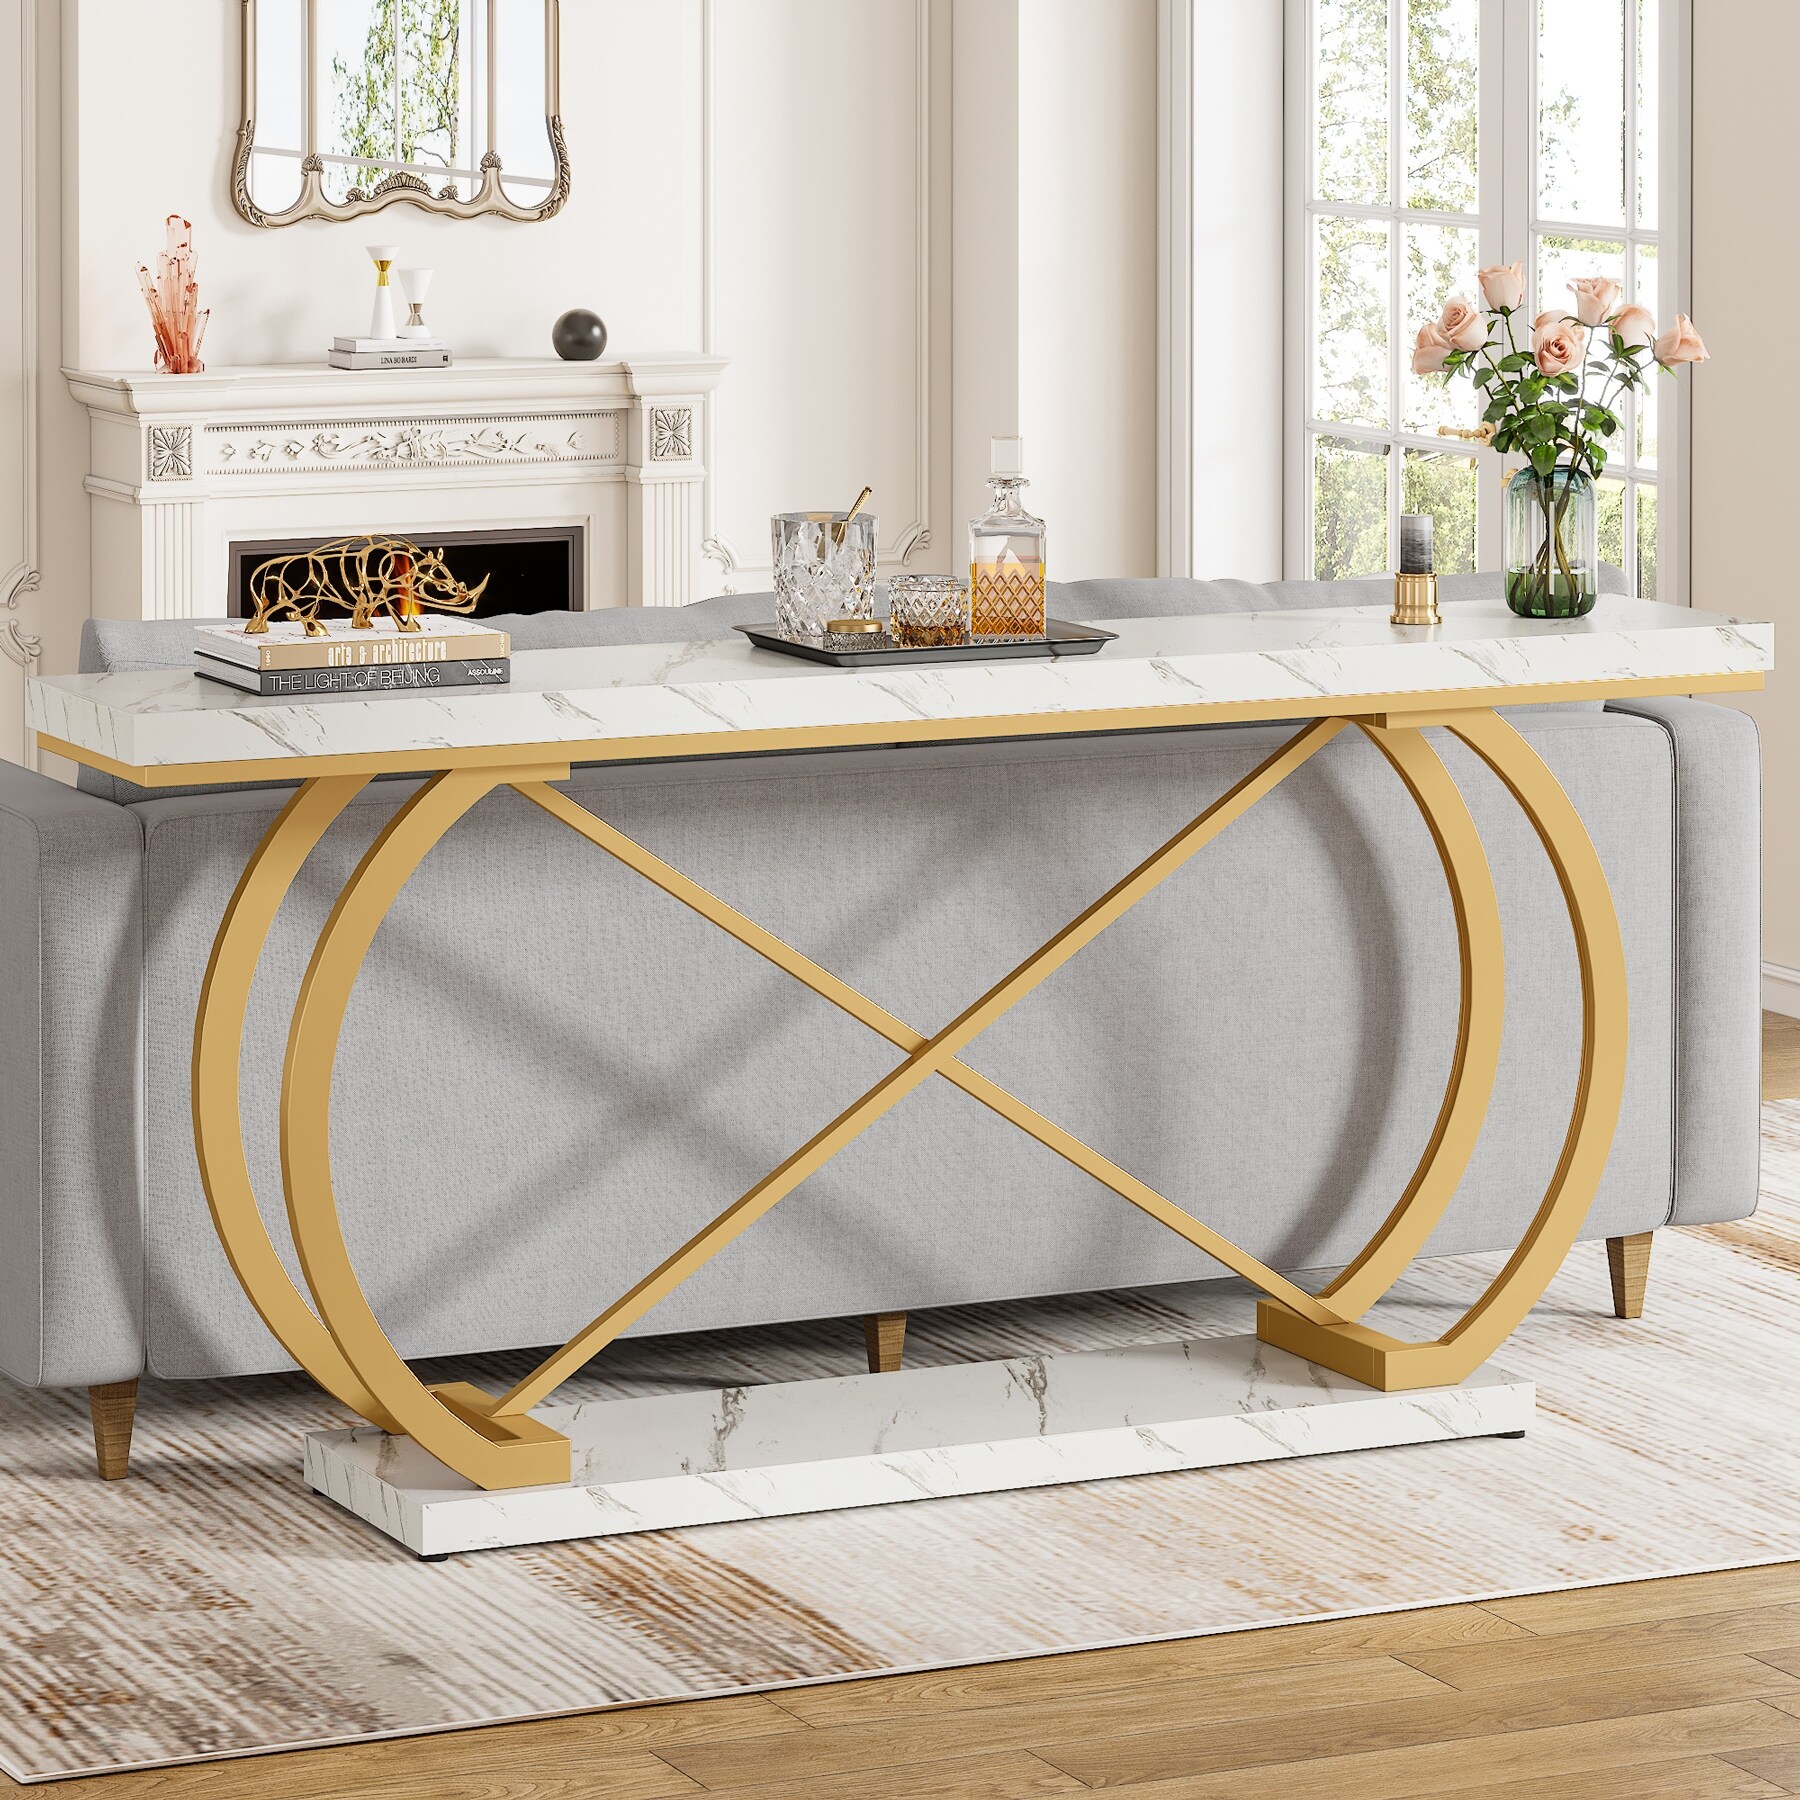 70.9 Inche Mid-Century Modern Faux Marble Console Sofa Table for Entryway,Hallway Accent Table with Half-Moon Legs - White/Gold